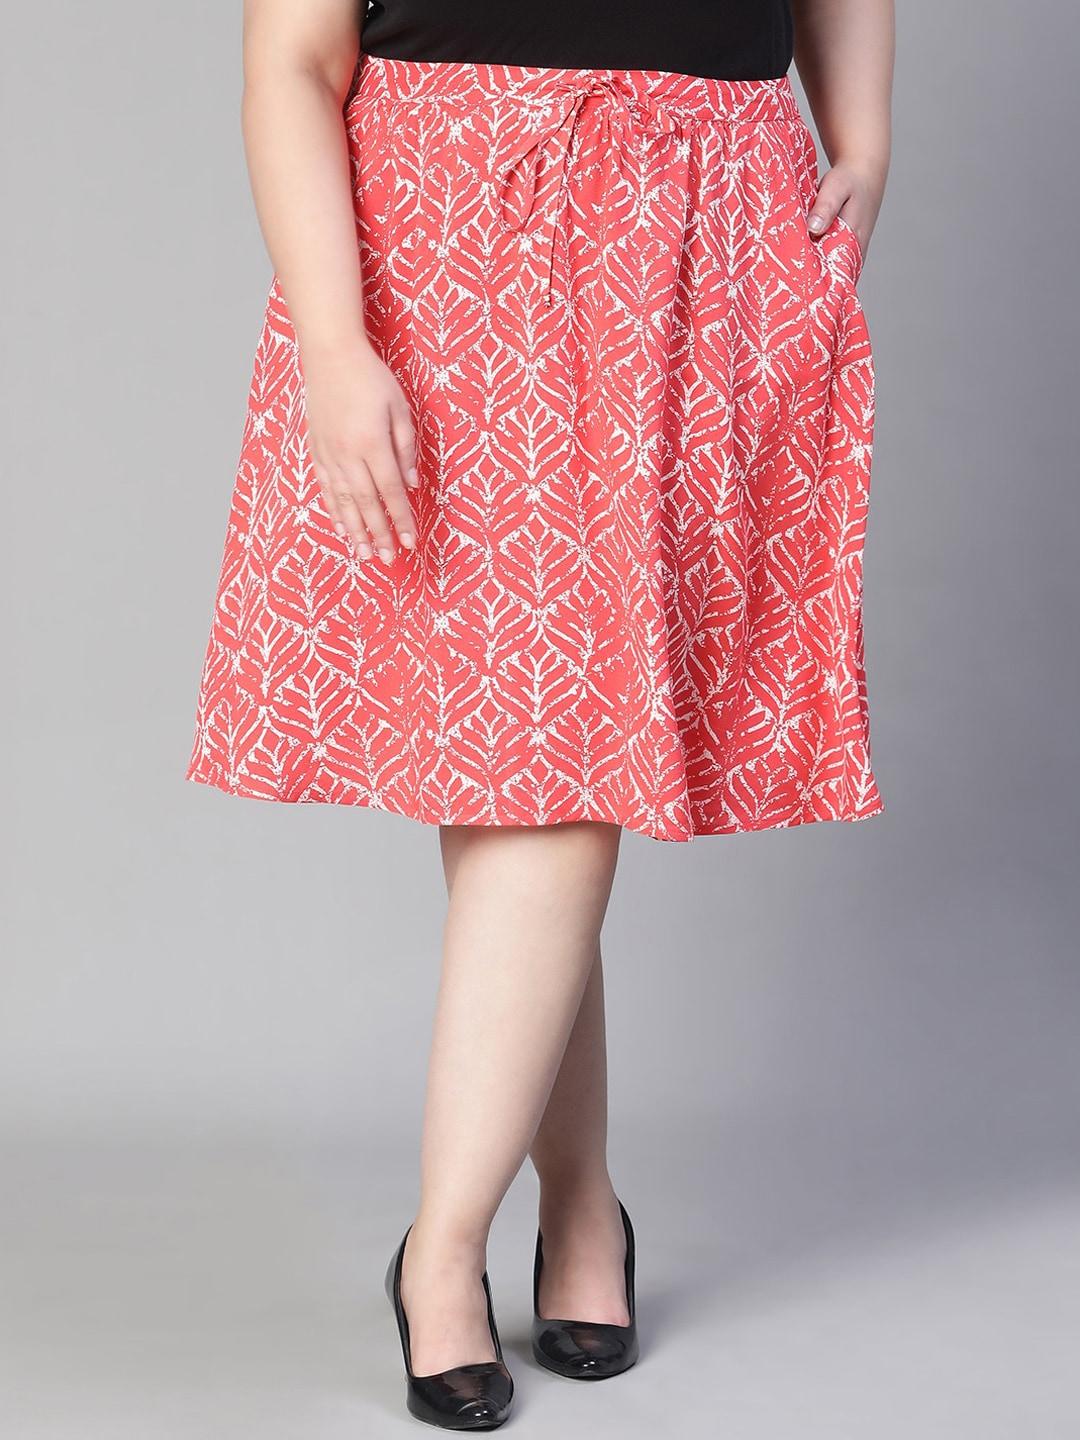 Oxolloxo Plus Size Floral Printed Flared Midi Skirt